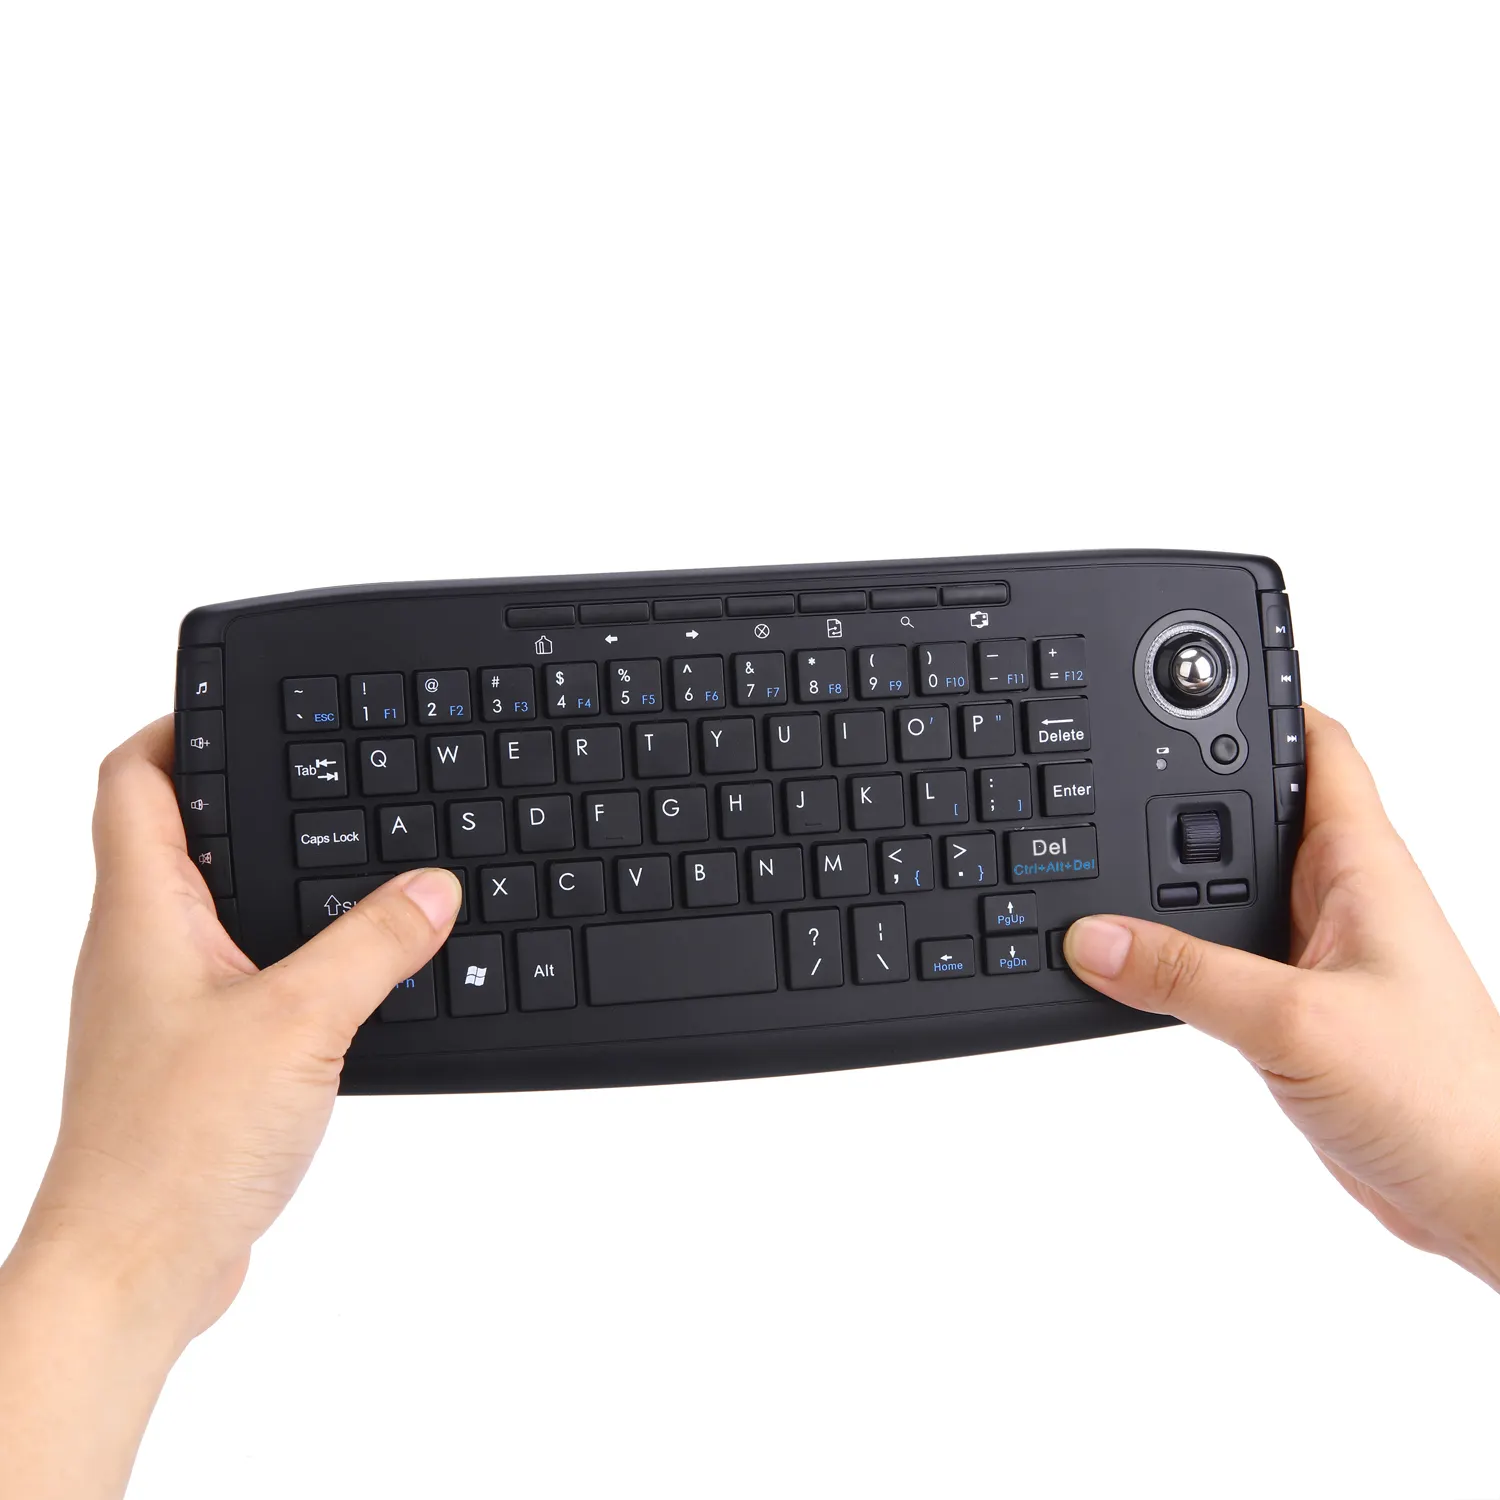 2.4ghz mini wireless multimedia keyboard with trackball mouse